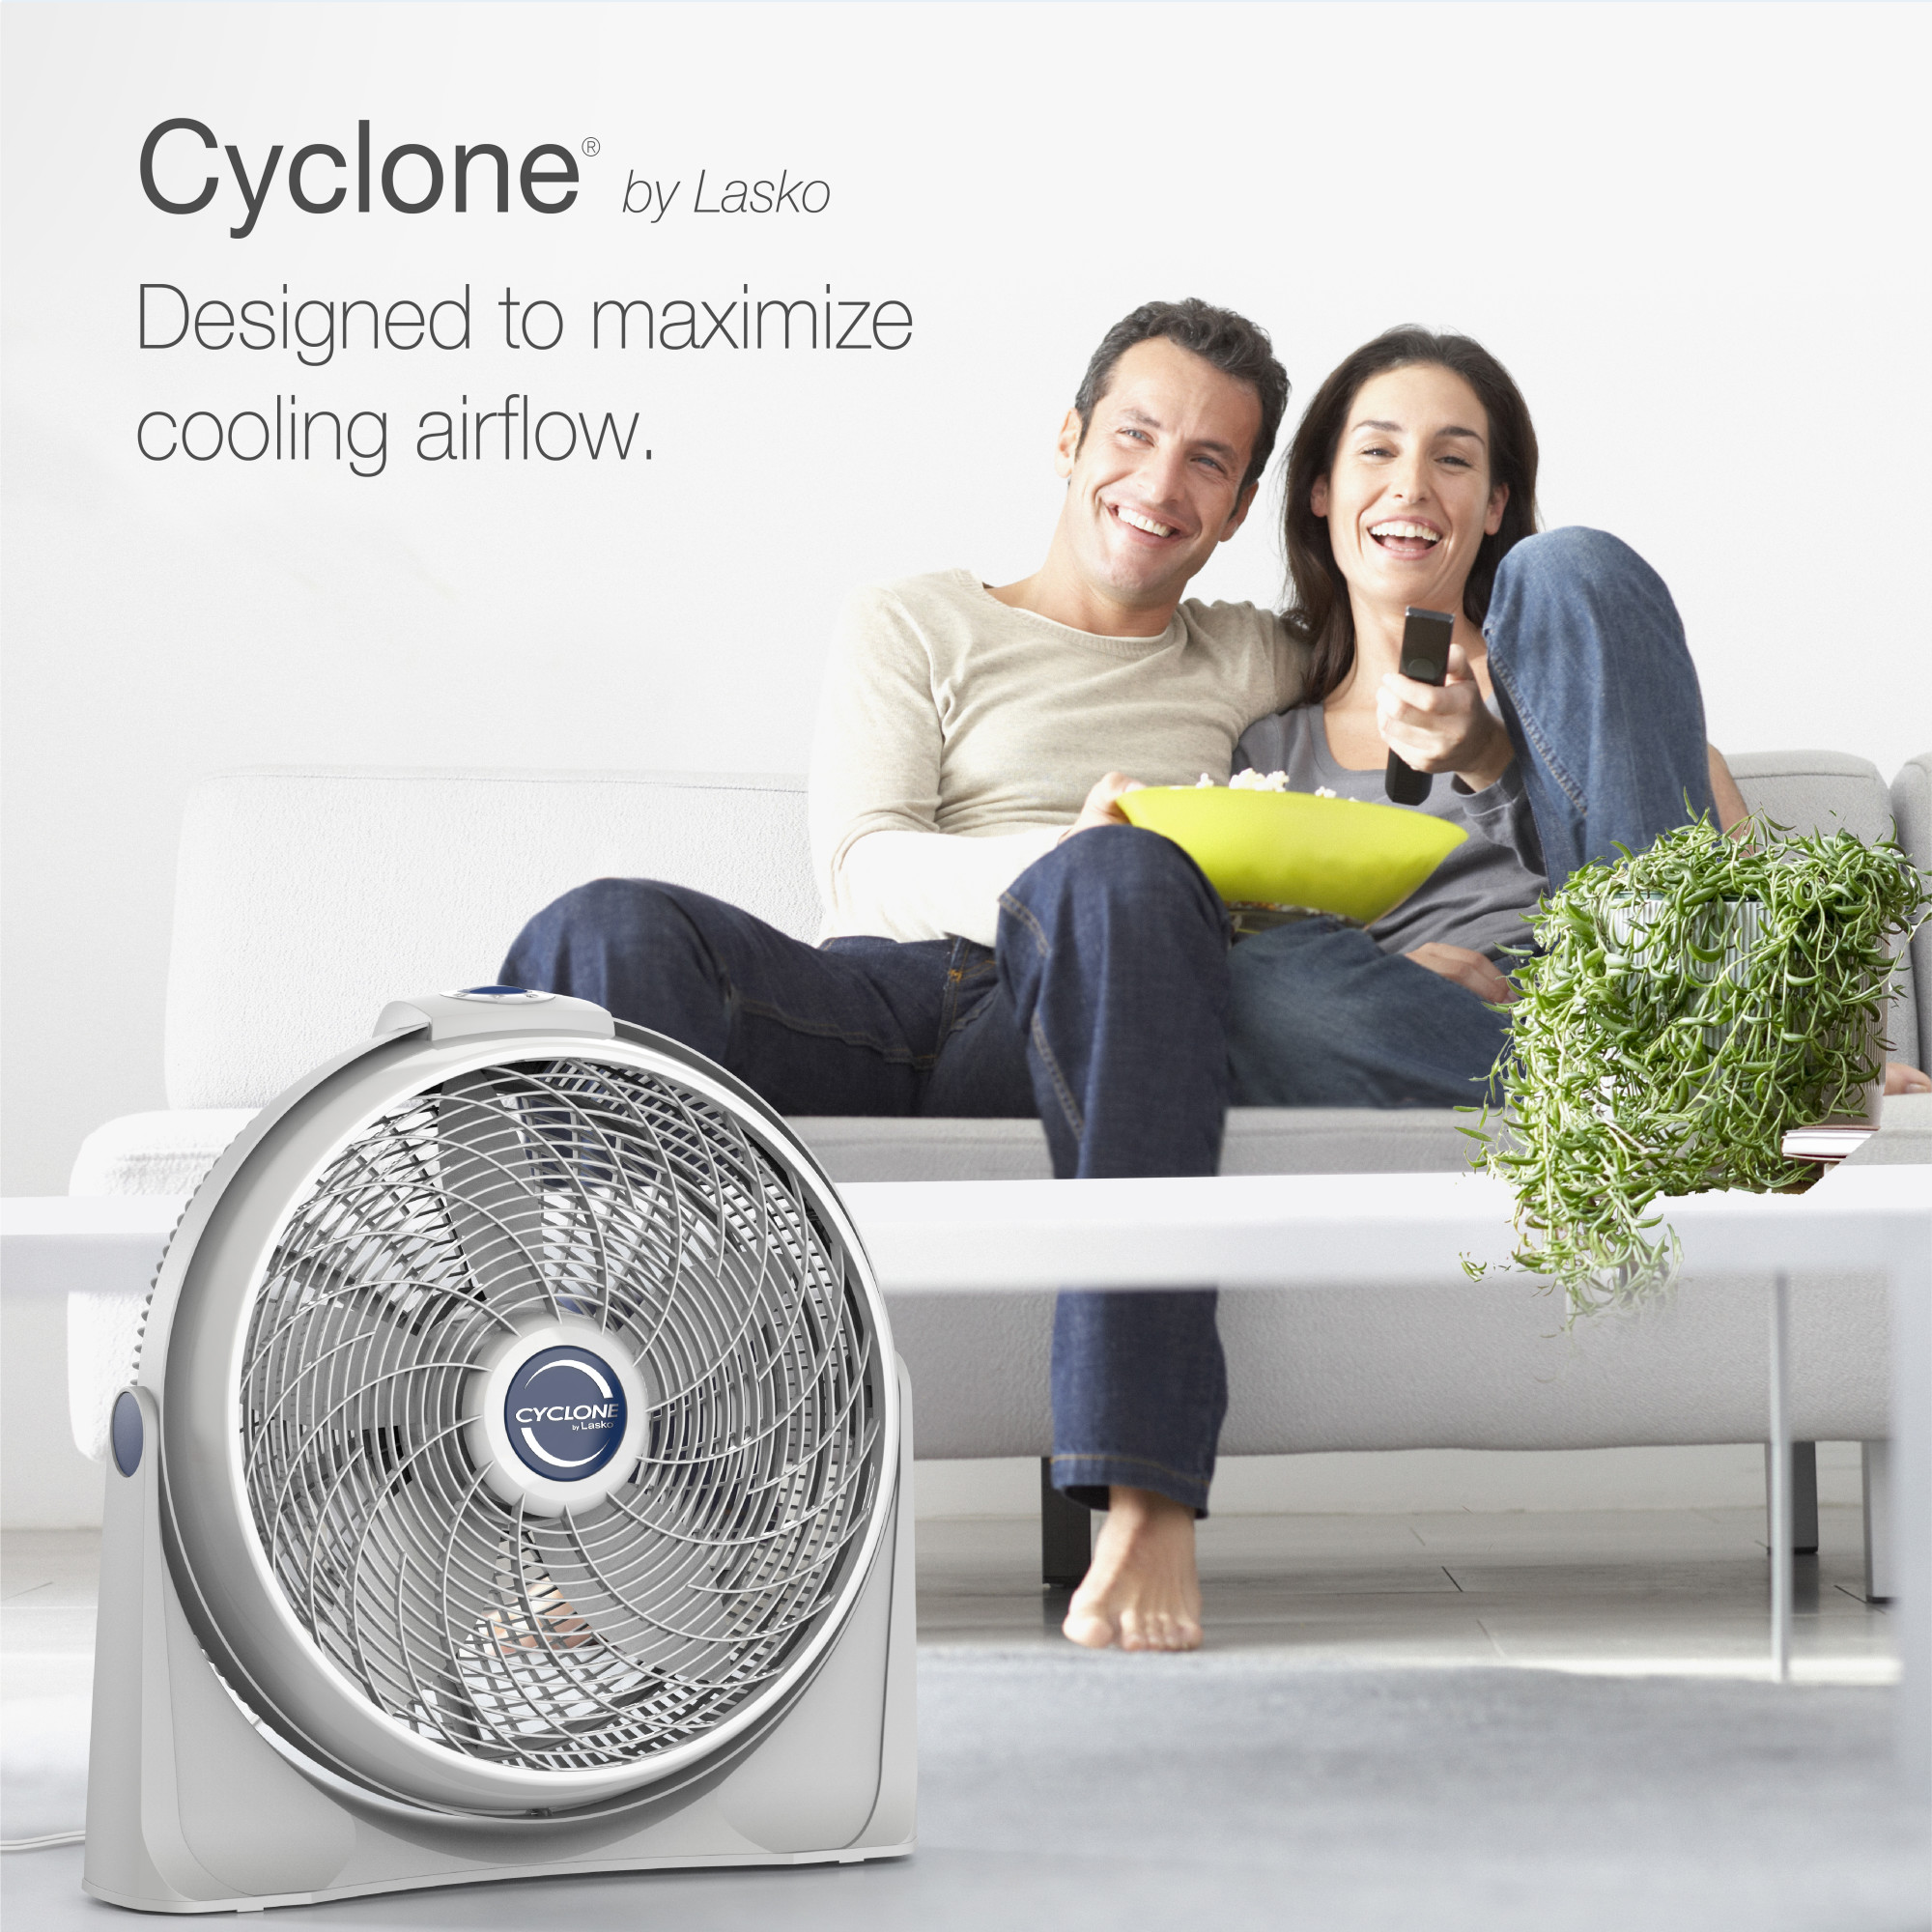 Lasko 20" Cyclone Air Circulator Floor Fan with Wall Mount Option, 23" Height, White, 3520, New - image 2 of 14